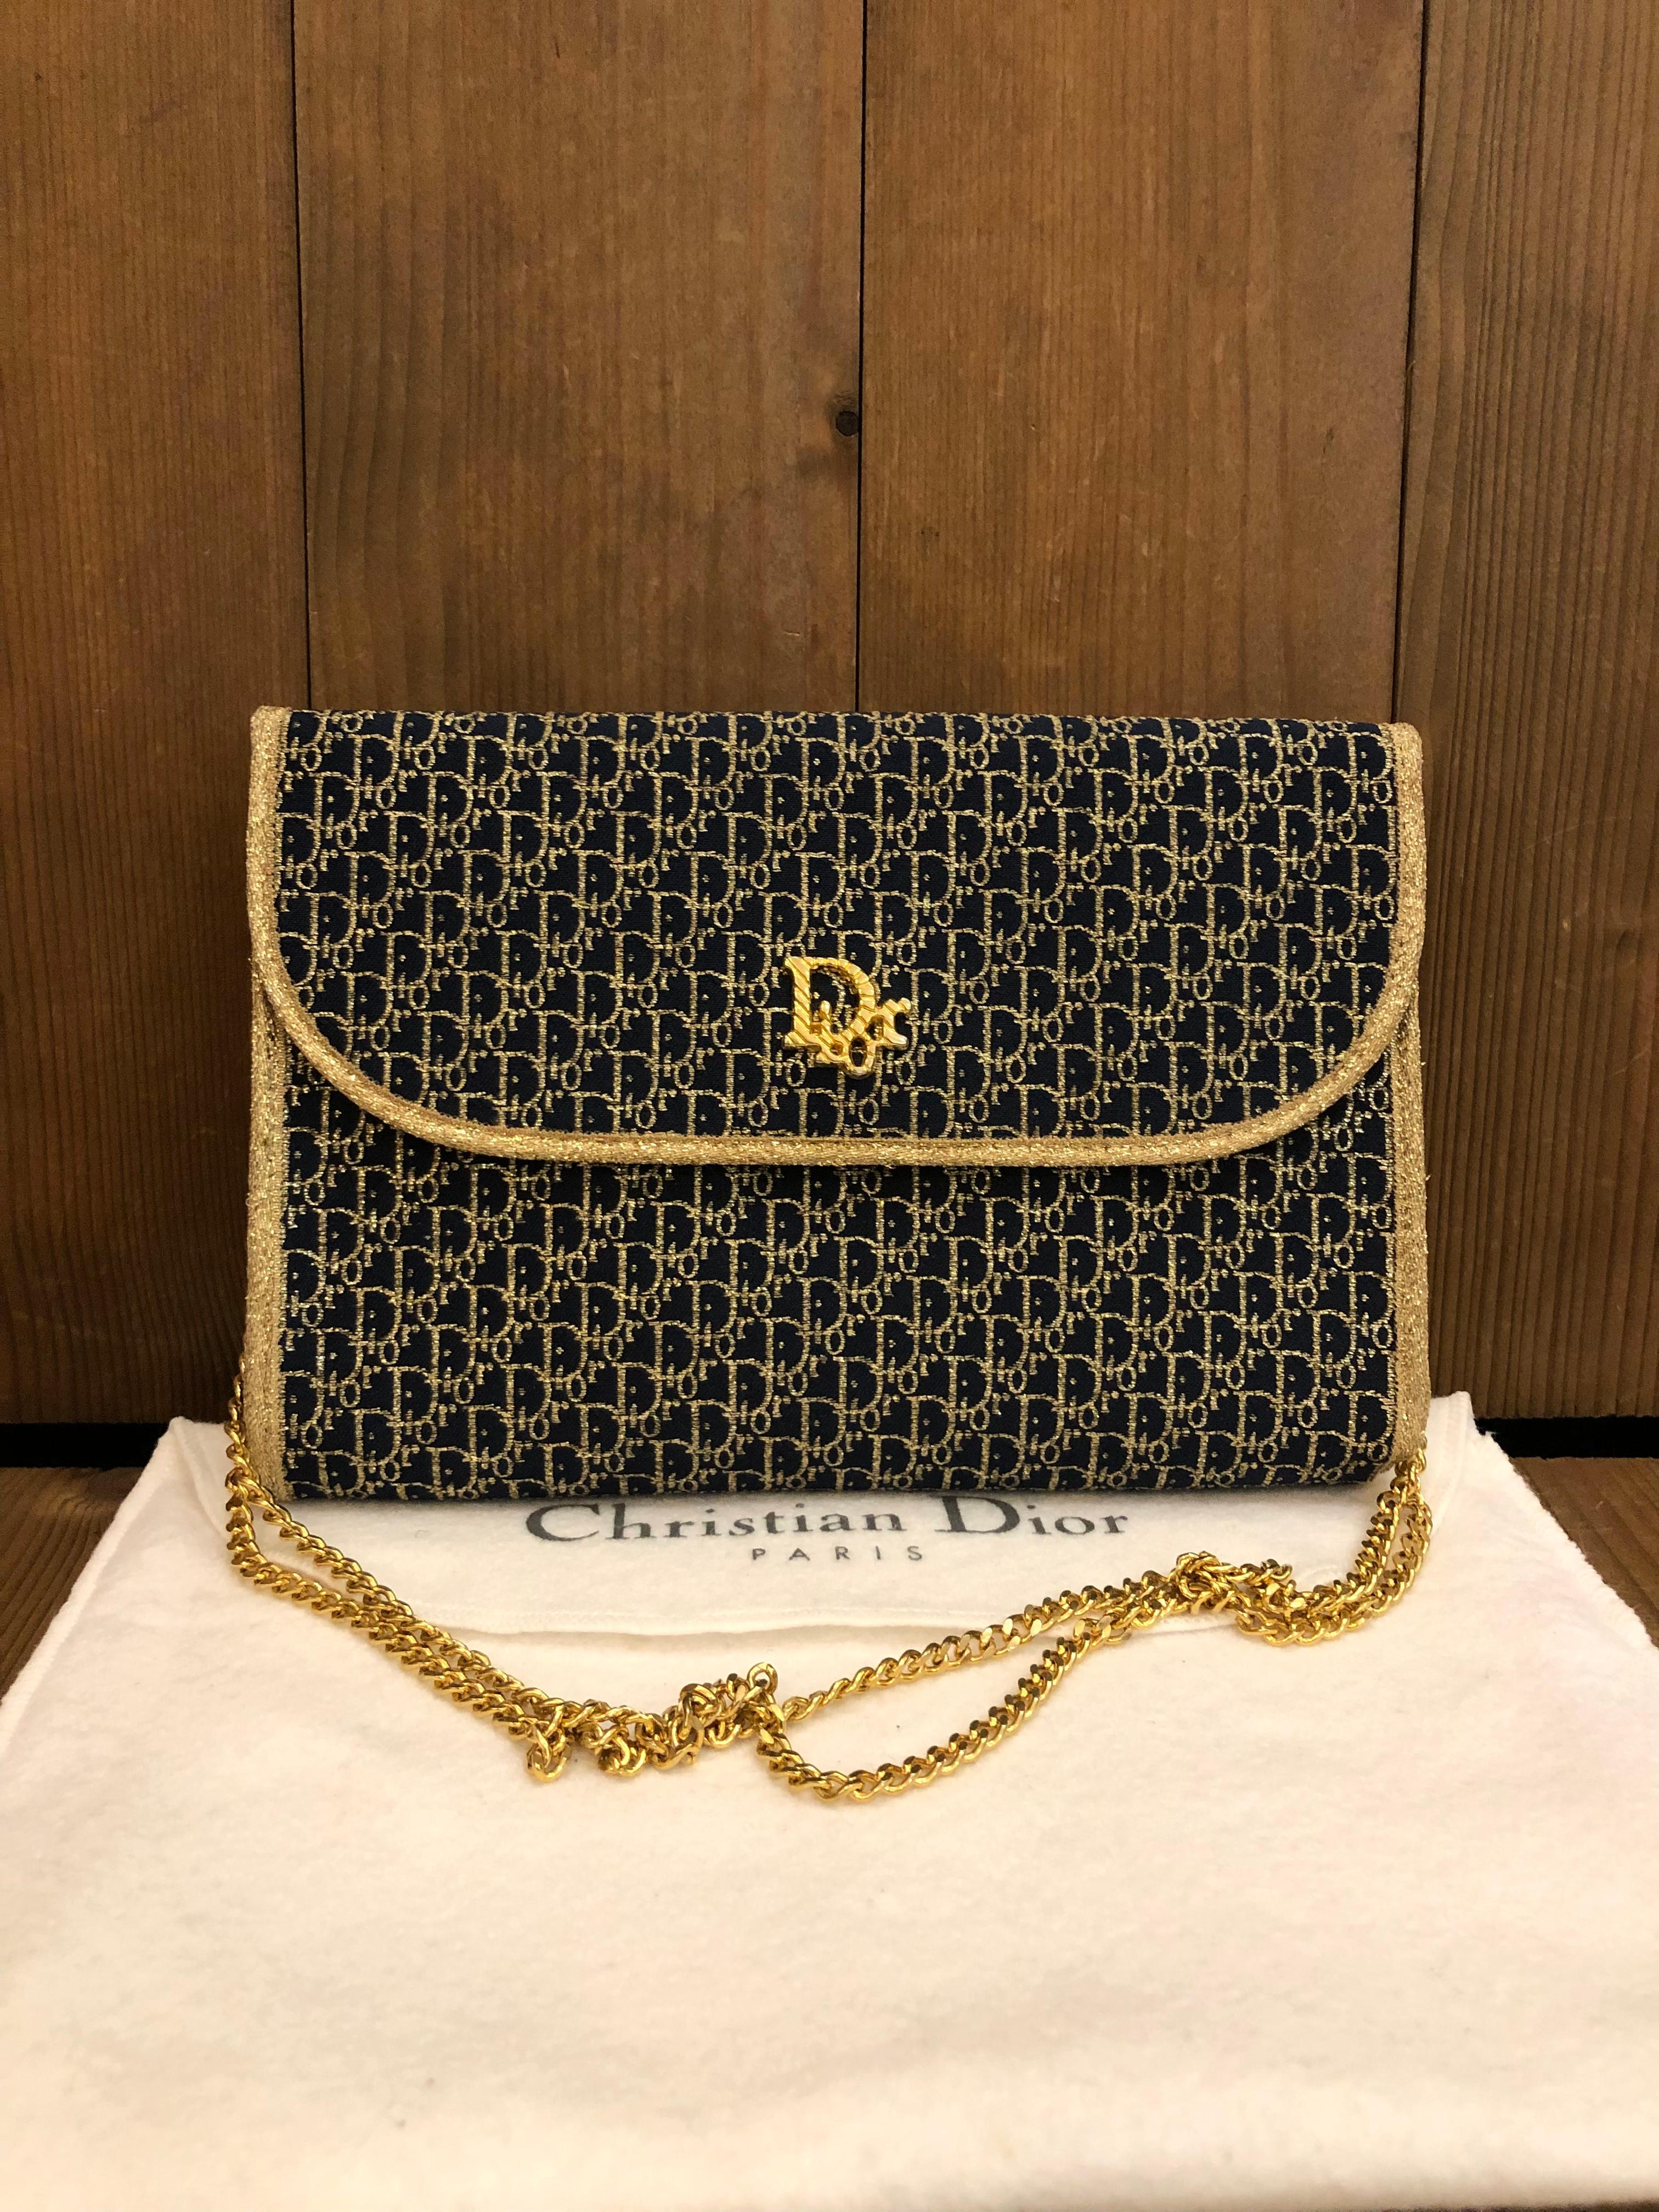 This vintage Christian Dior chain bag is crafted of Dior's signature trotter jacquard in gold and navy. Front flap closure with snap fastening opens to a navy leather interior. This vintage Dior features a gold toned chain that allows you to carry